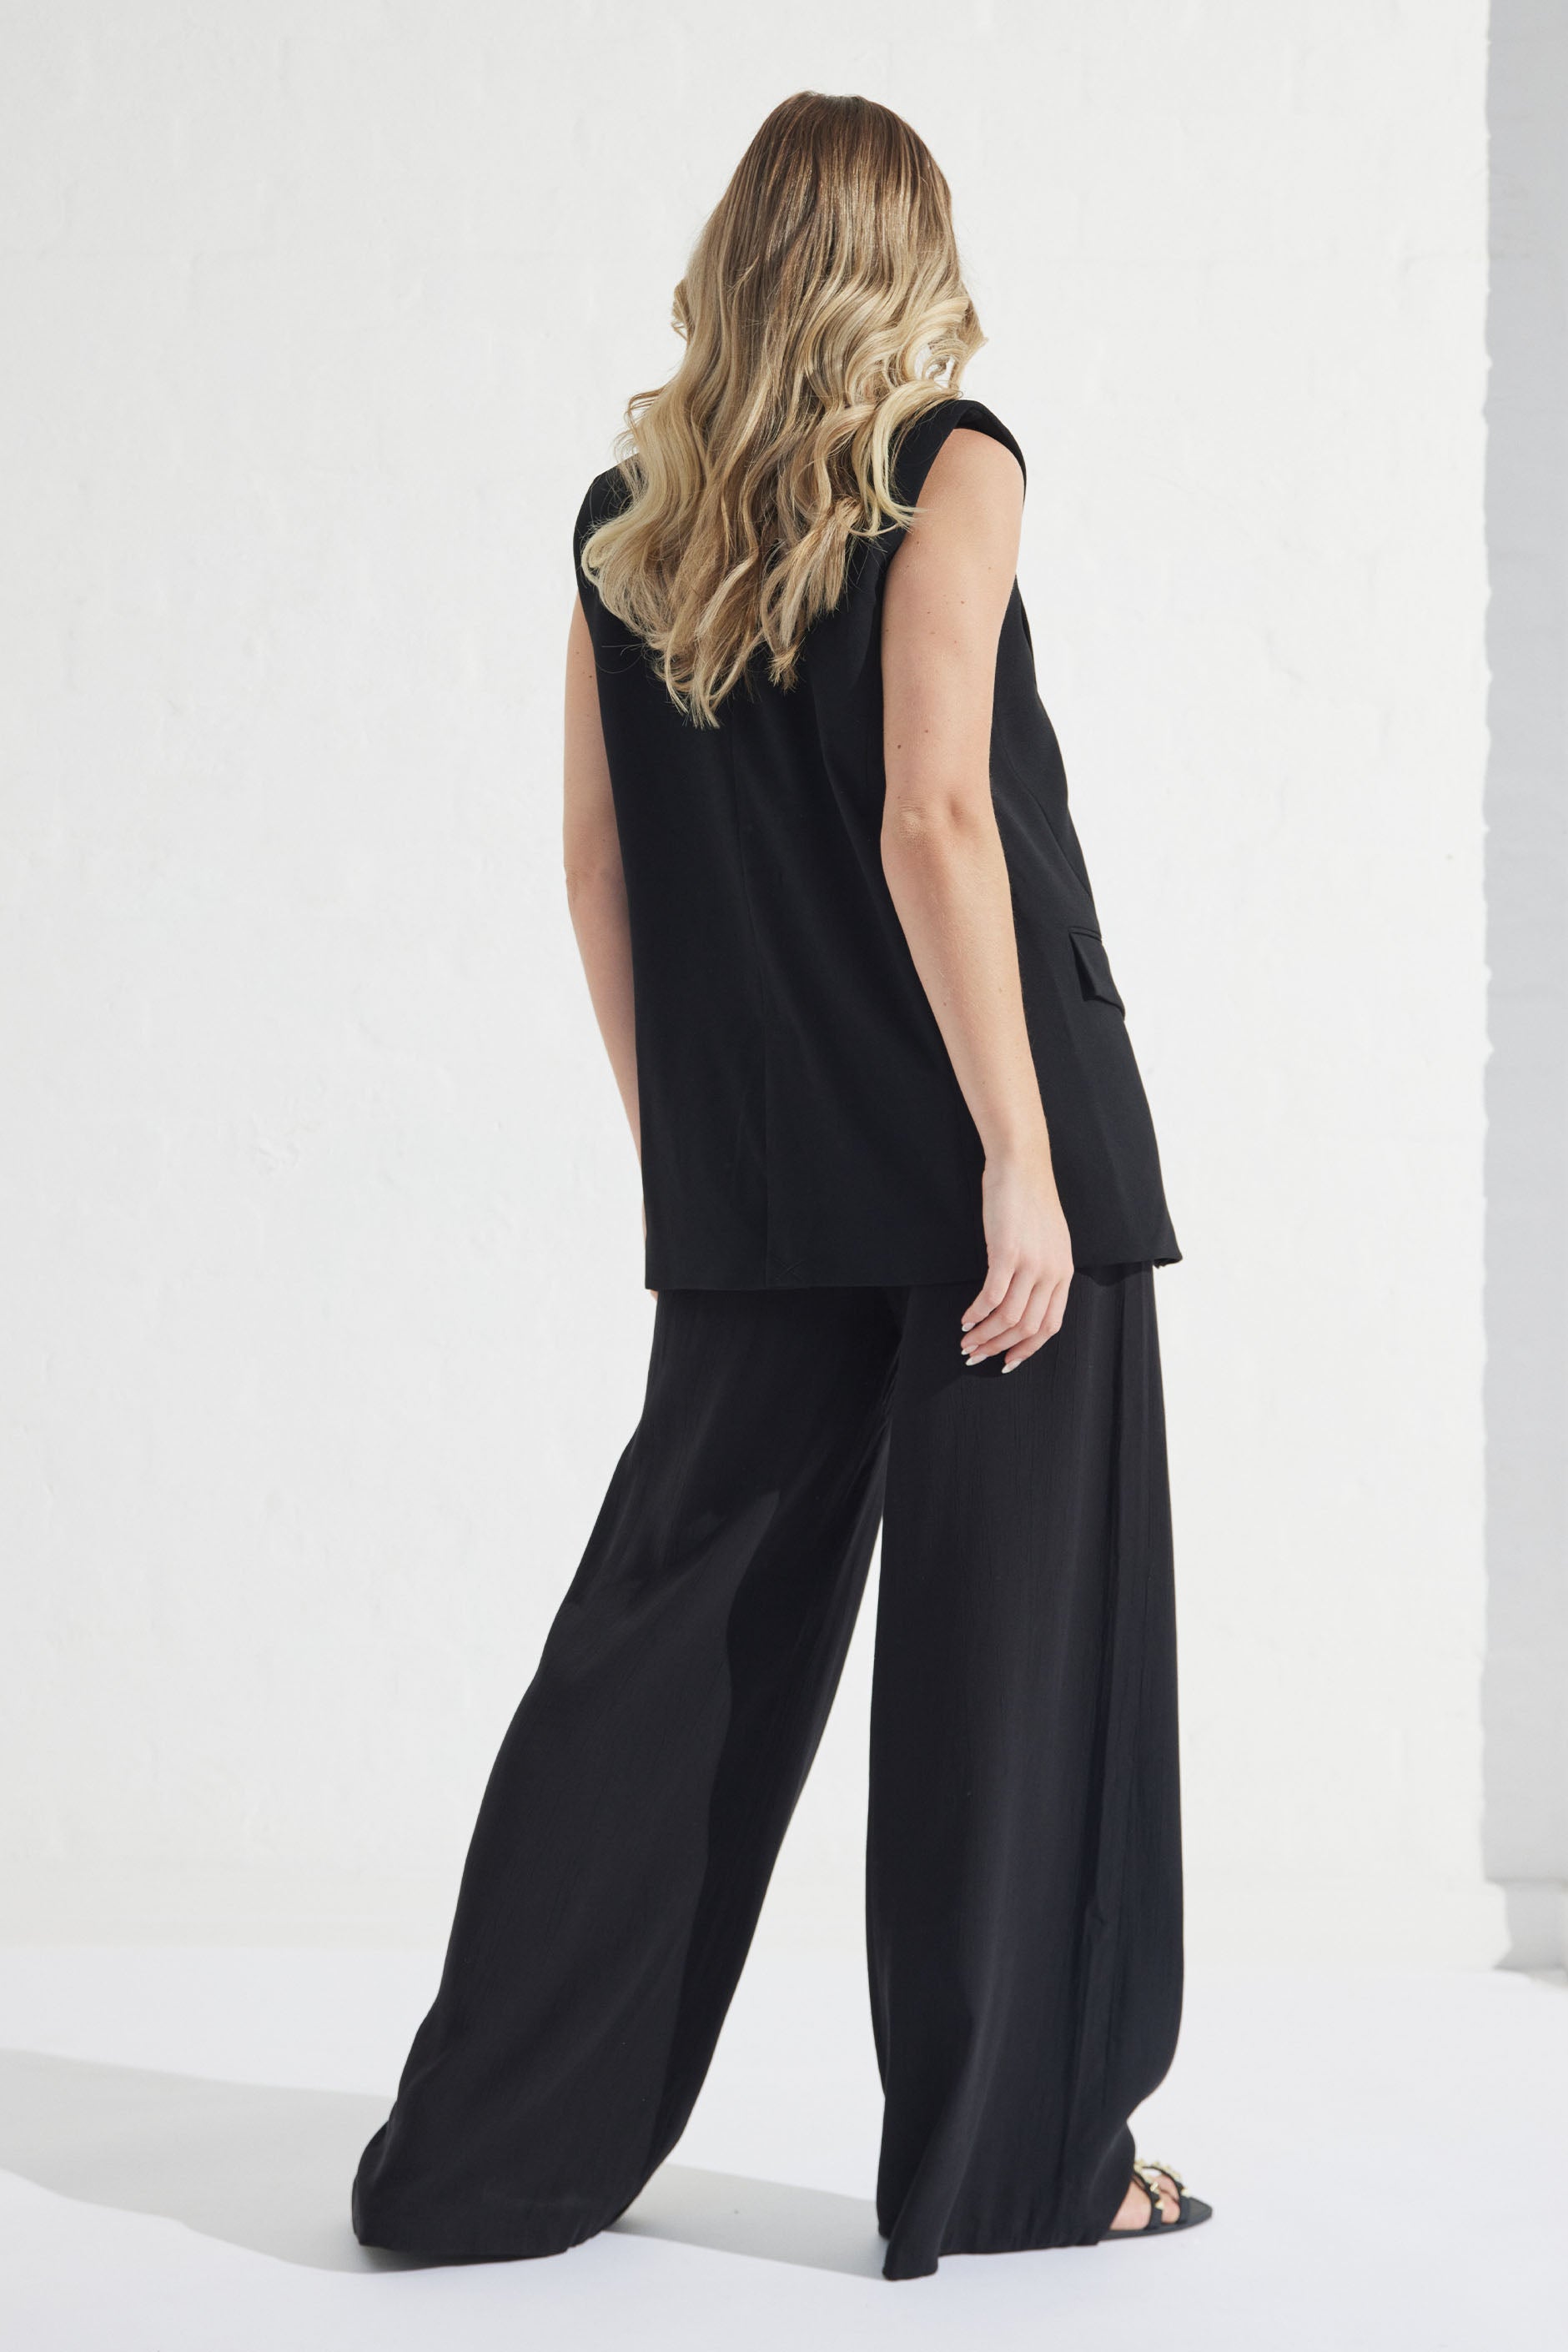 What Shoes Should You Pair with Wide Leg Crop Pants? - my 9 to 5 shoes